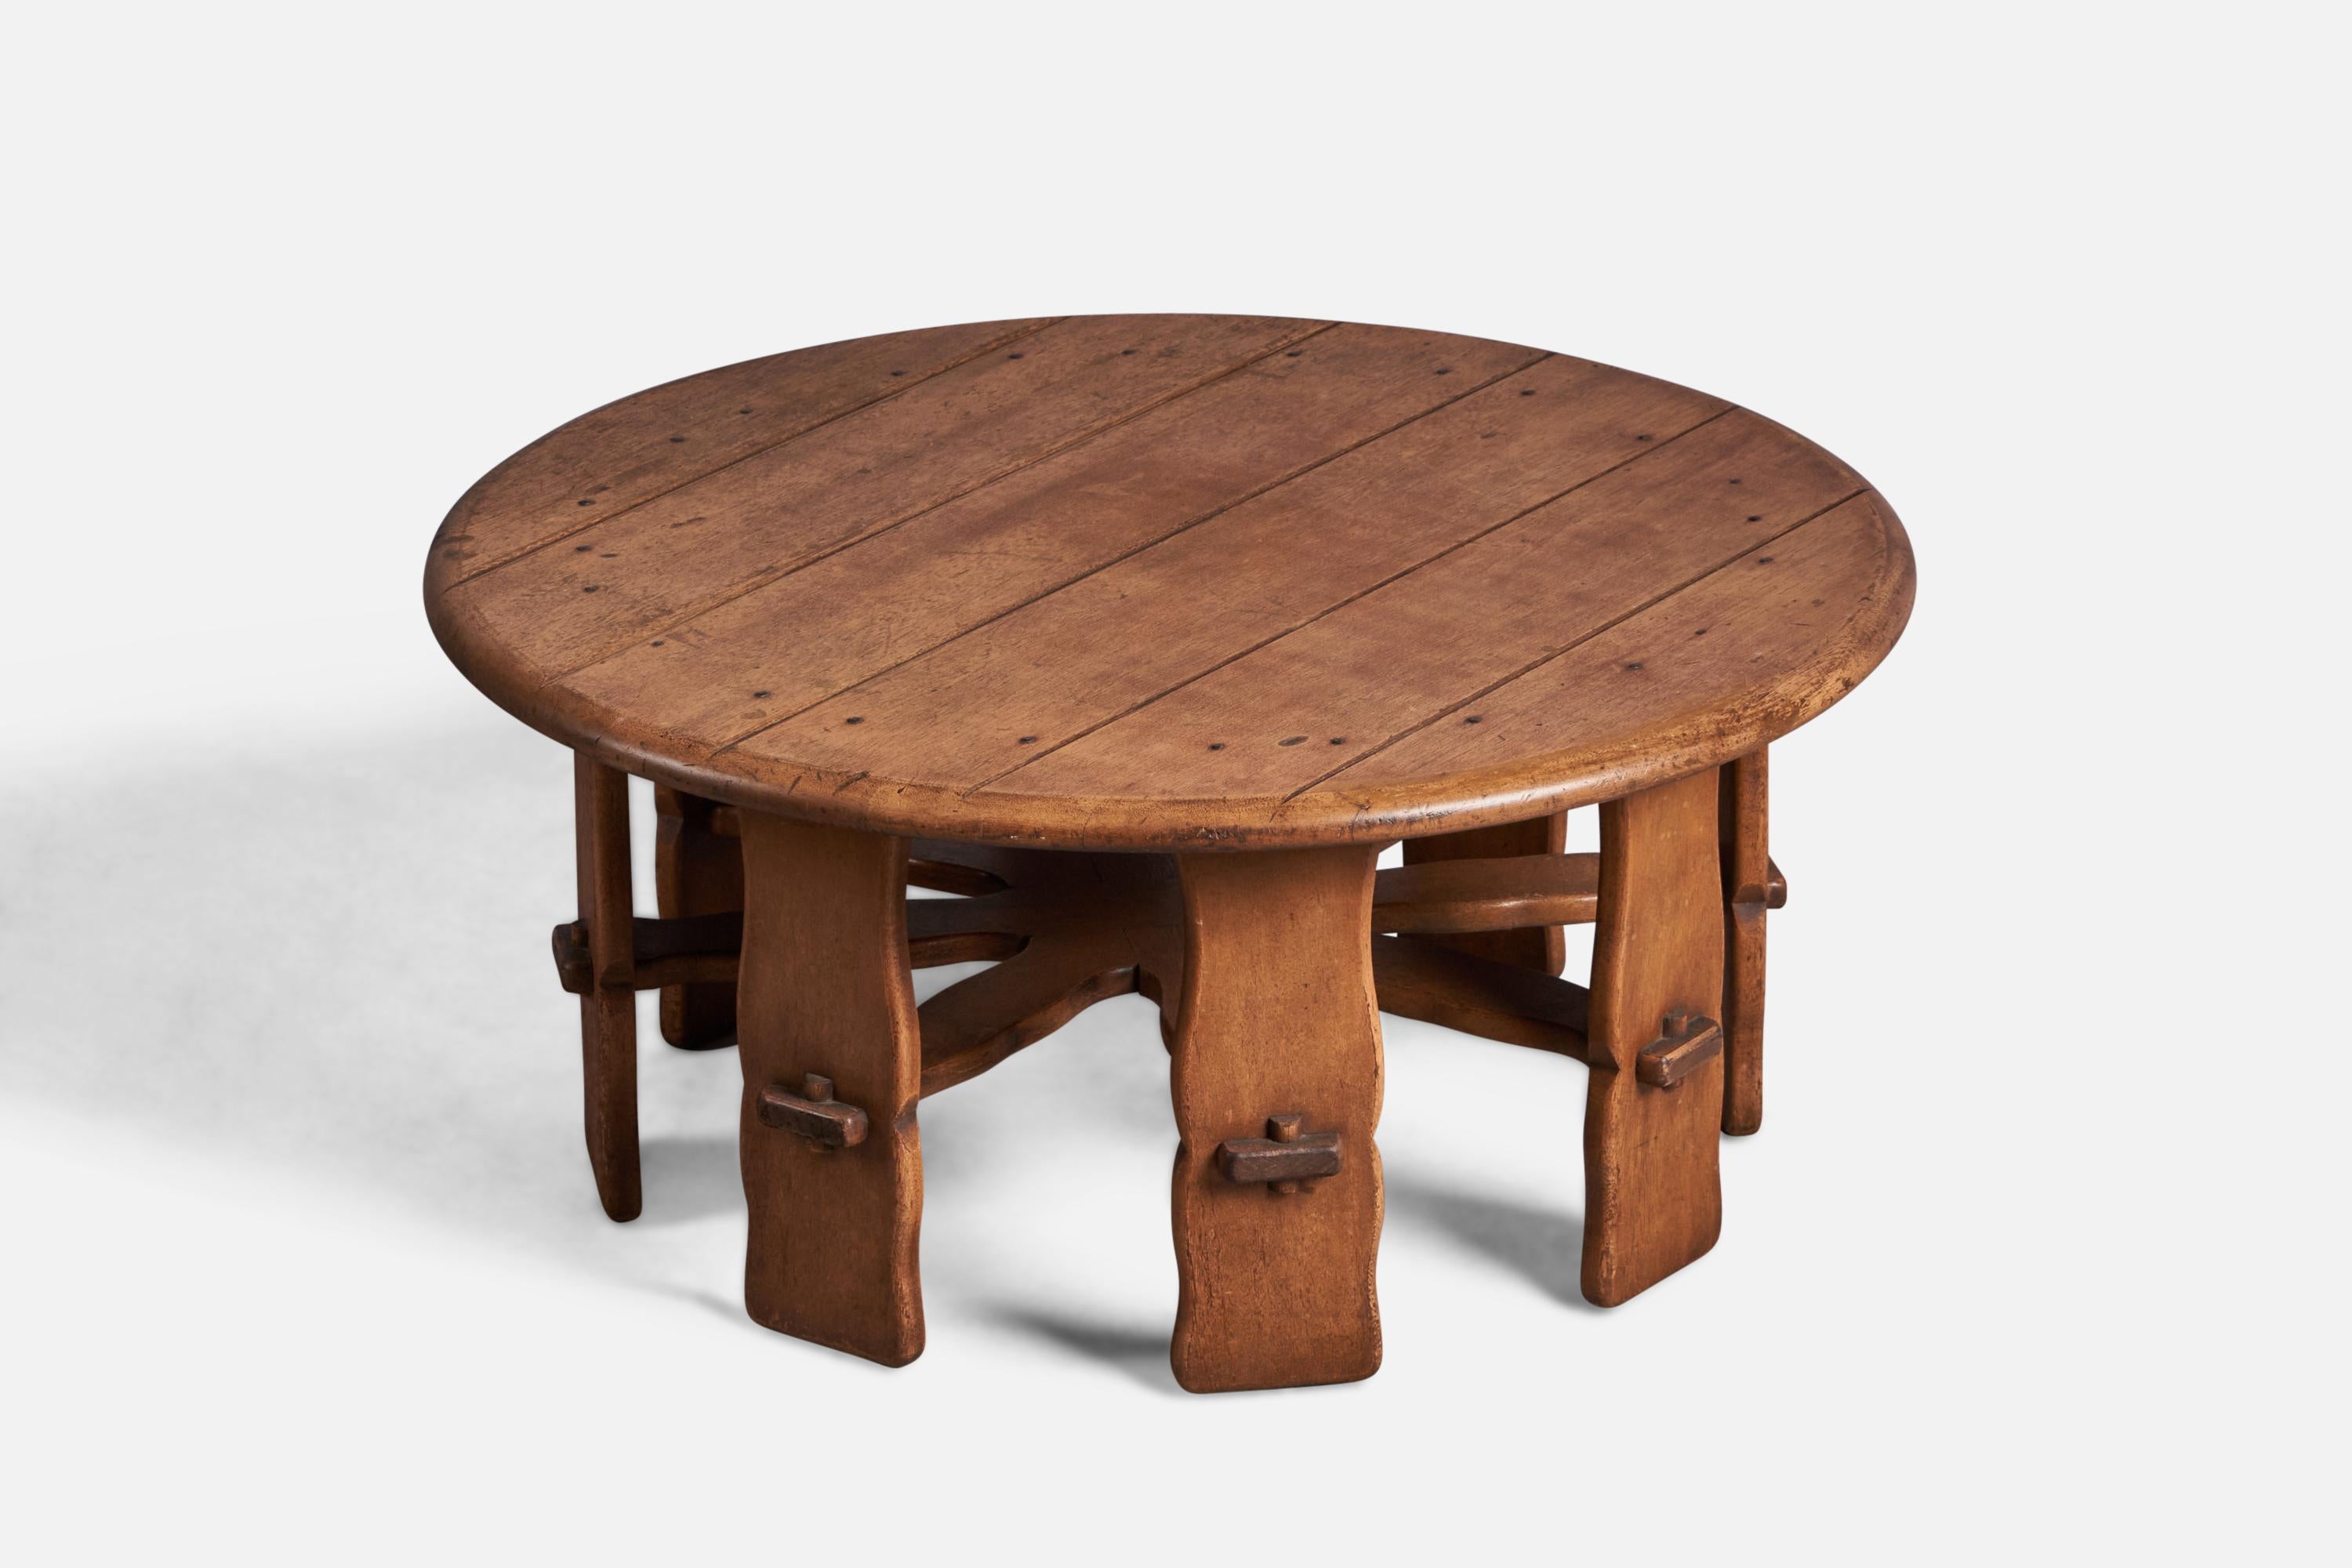 An oak coffee or cocktail table designed and produced by Brown Saltman, California, USA, 1940s.